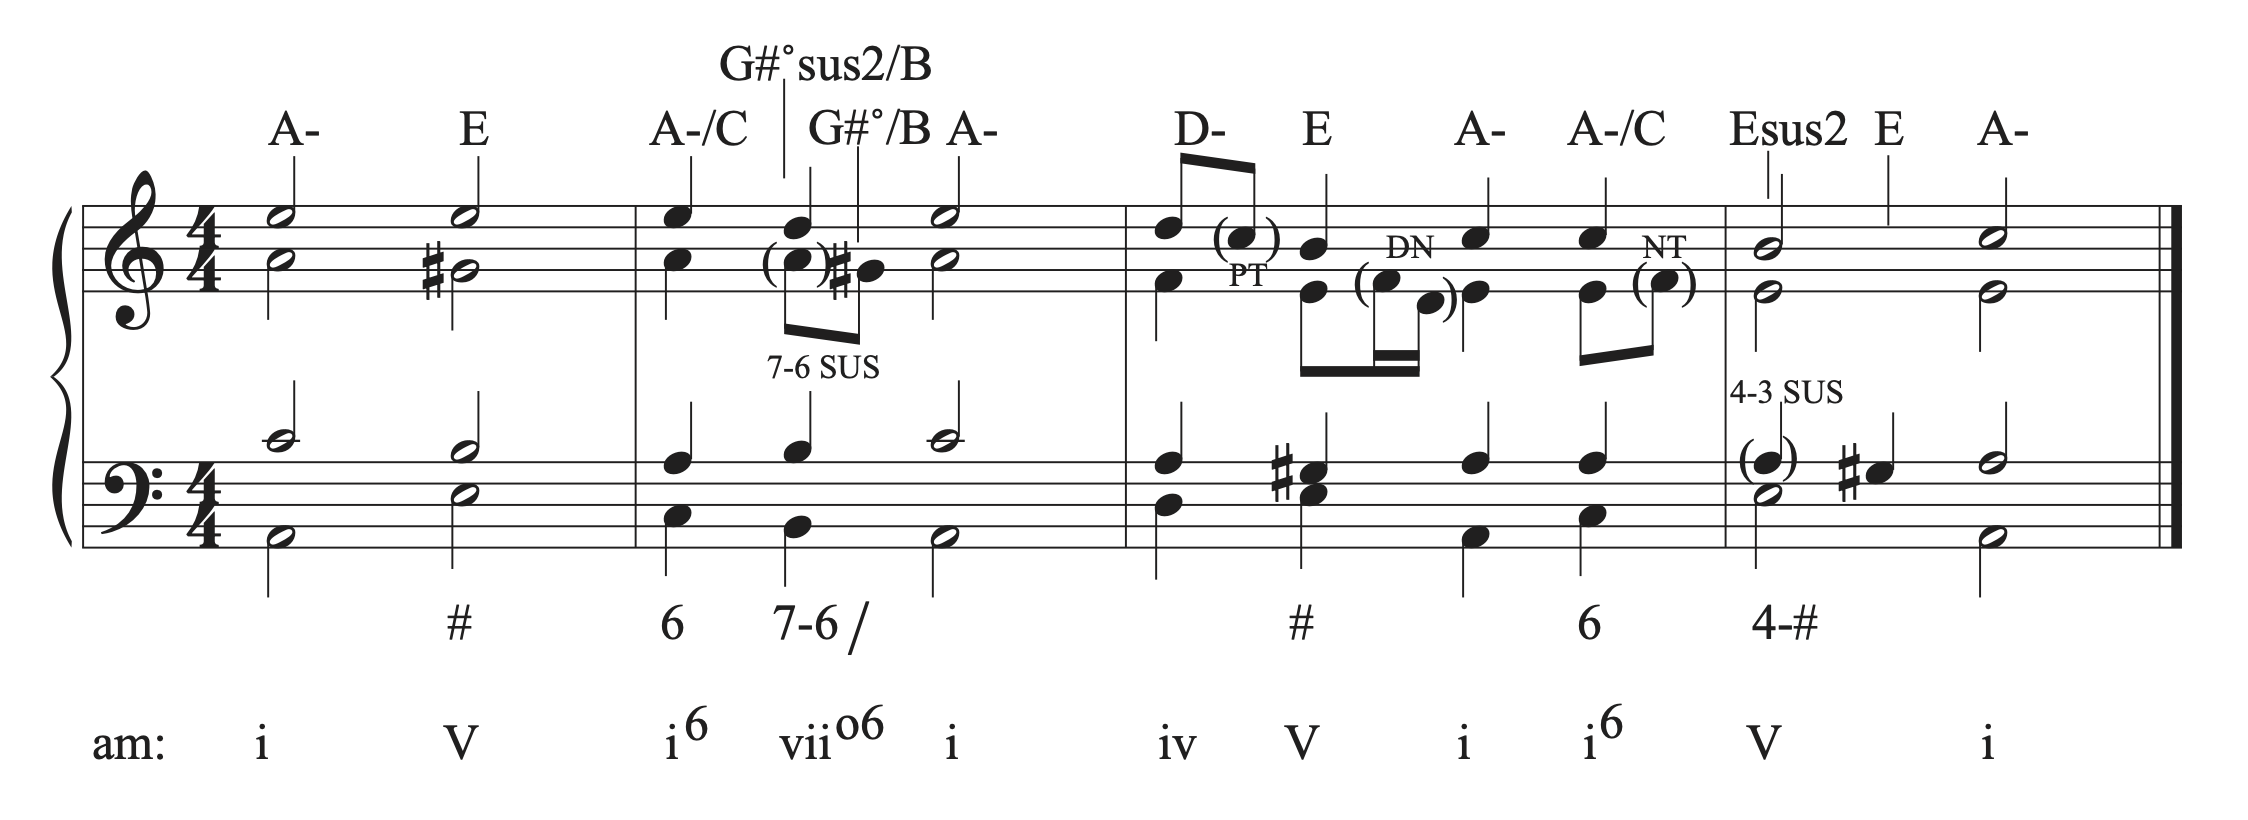 The musical example in A minor with a passing tone added.